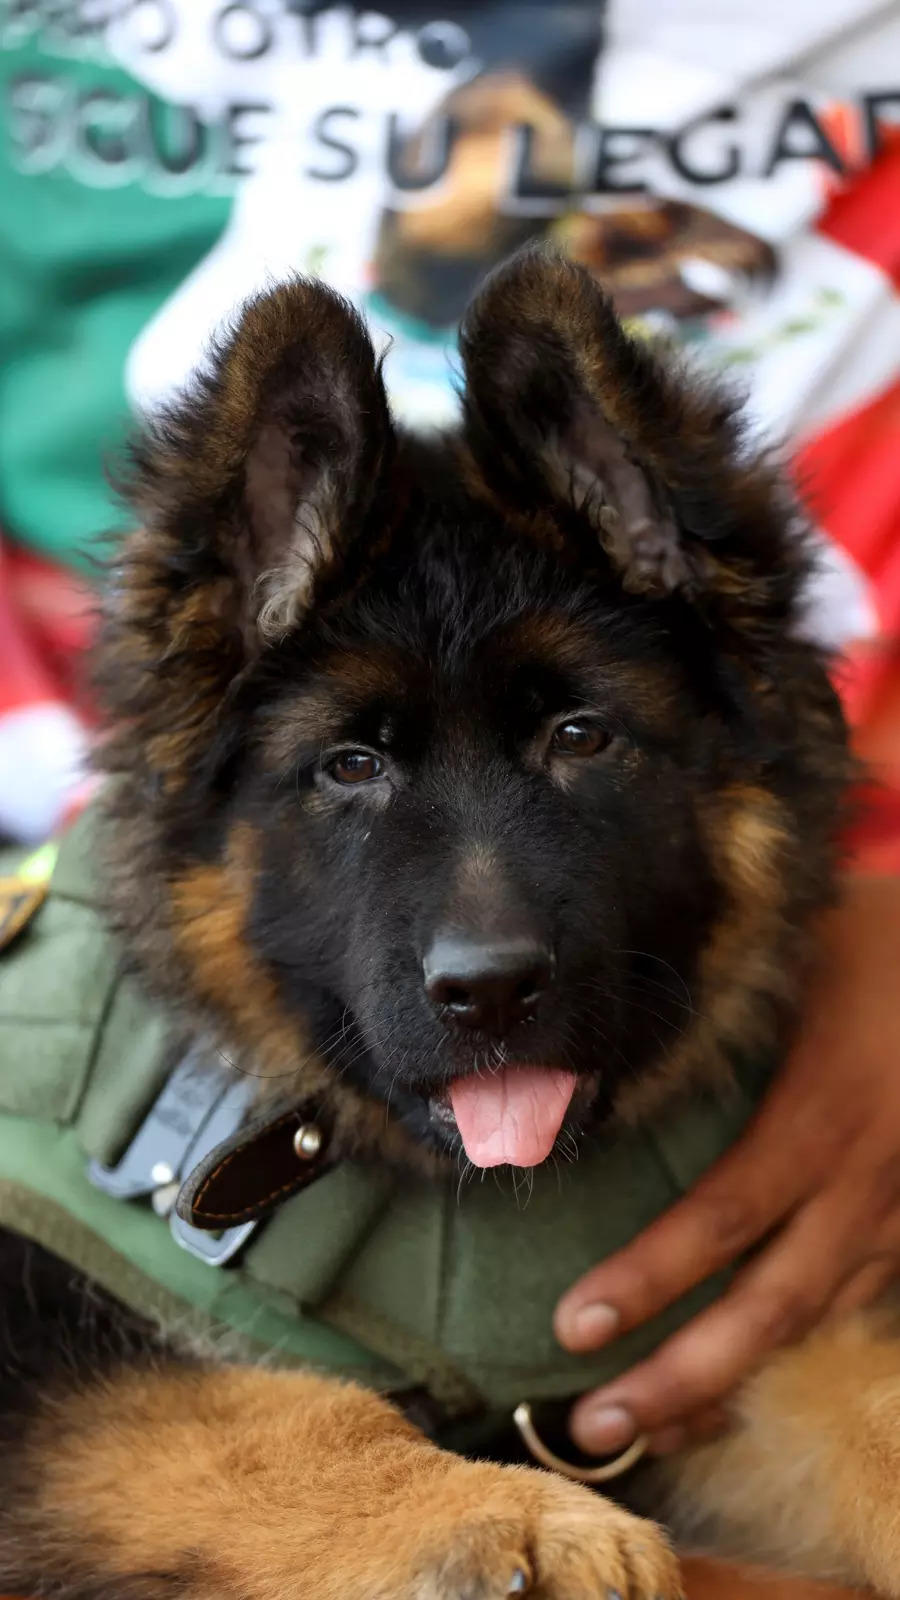 Turkey: Why Turkey gifted Mexico a German Shepherd pup | EconomicTimes